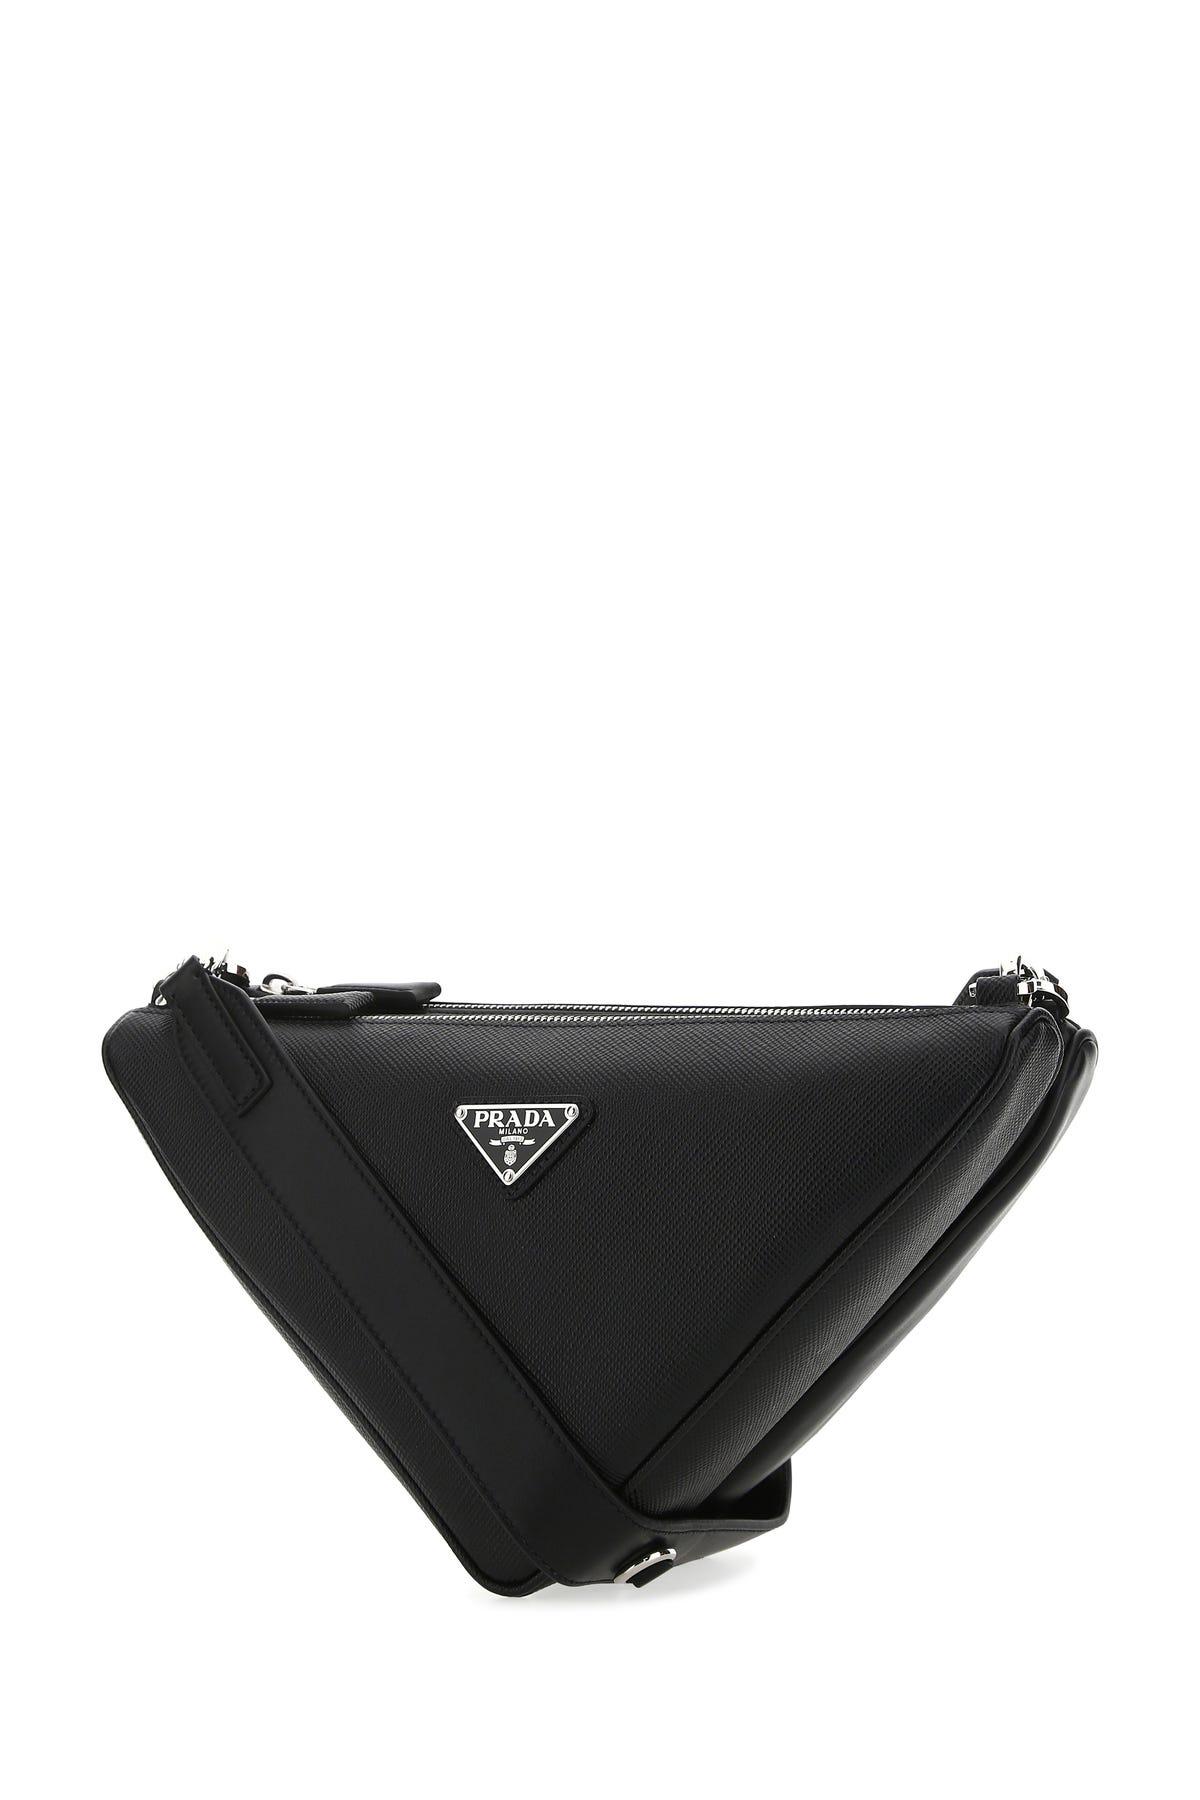 Prada Leather Triangle Double Crossbody Bag in Black for Men | Lyst